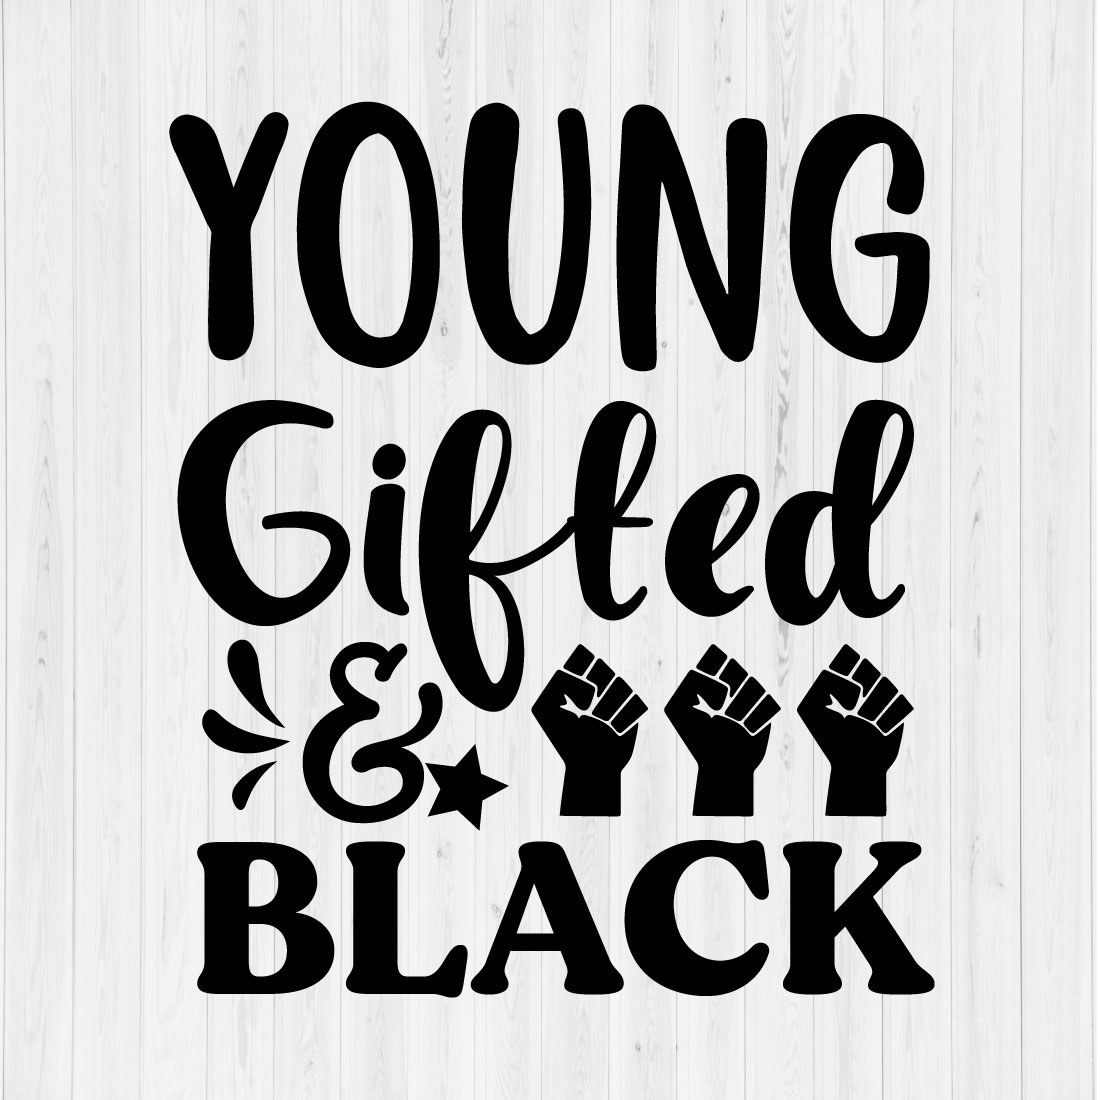 Young Gifted & Black cover image.